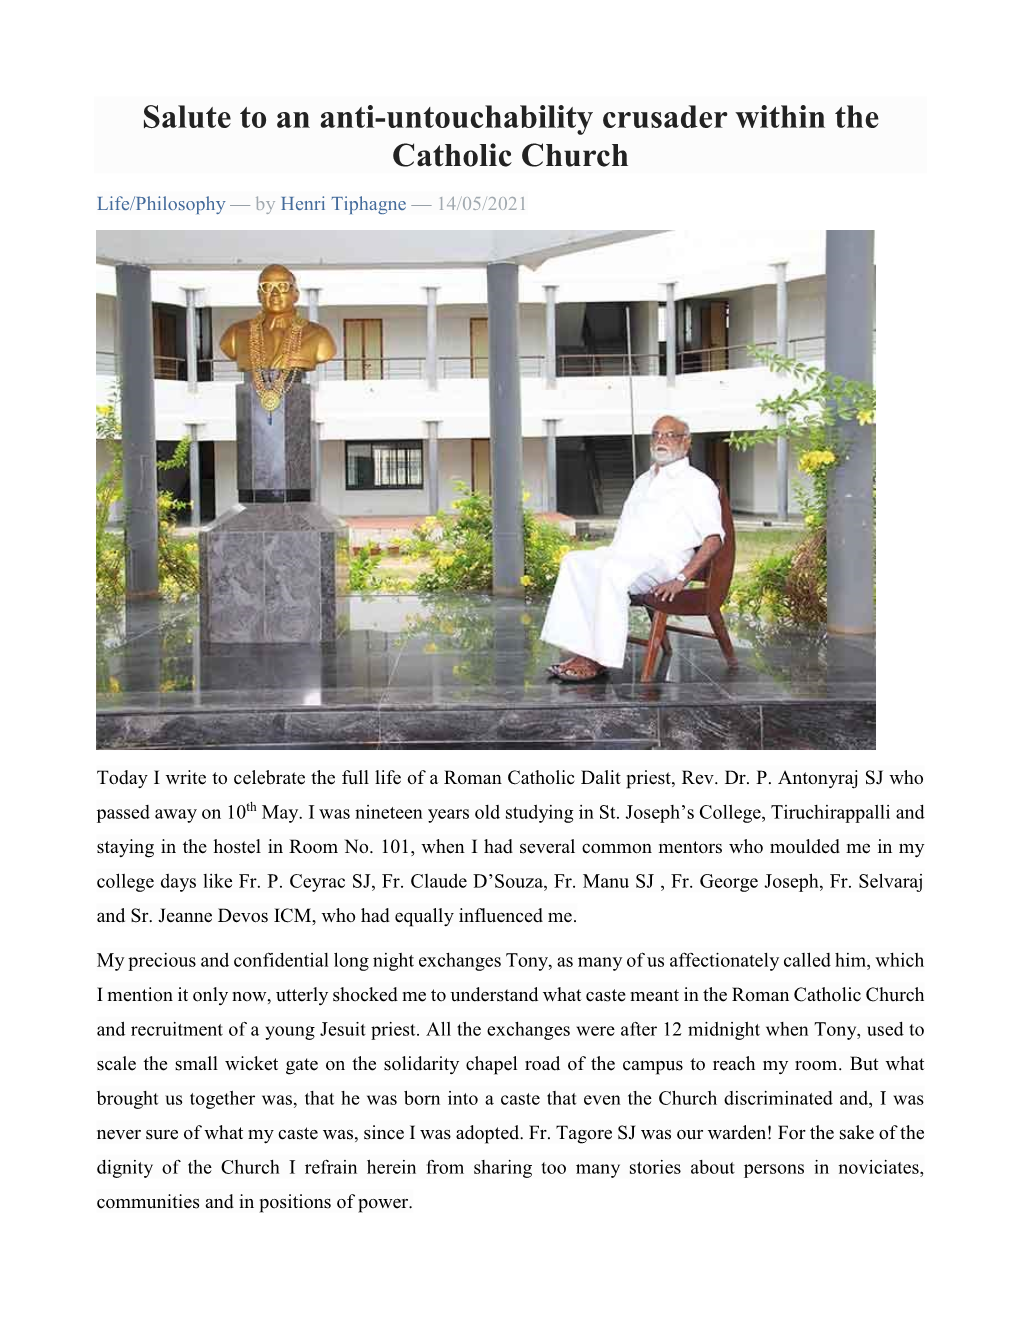 Salute to an Anti-Untouchability Crusader Within the Catholic Church